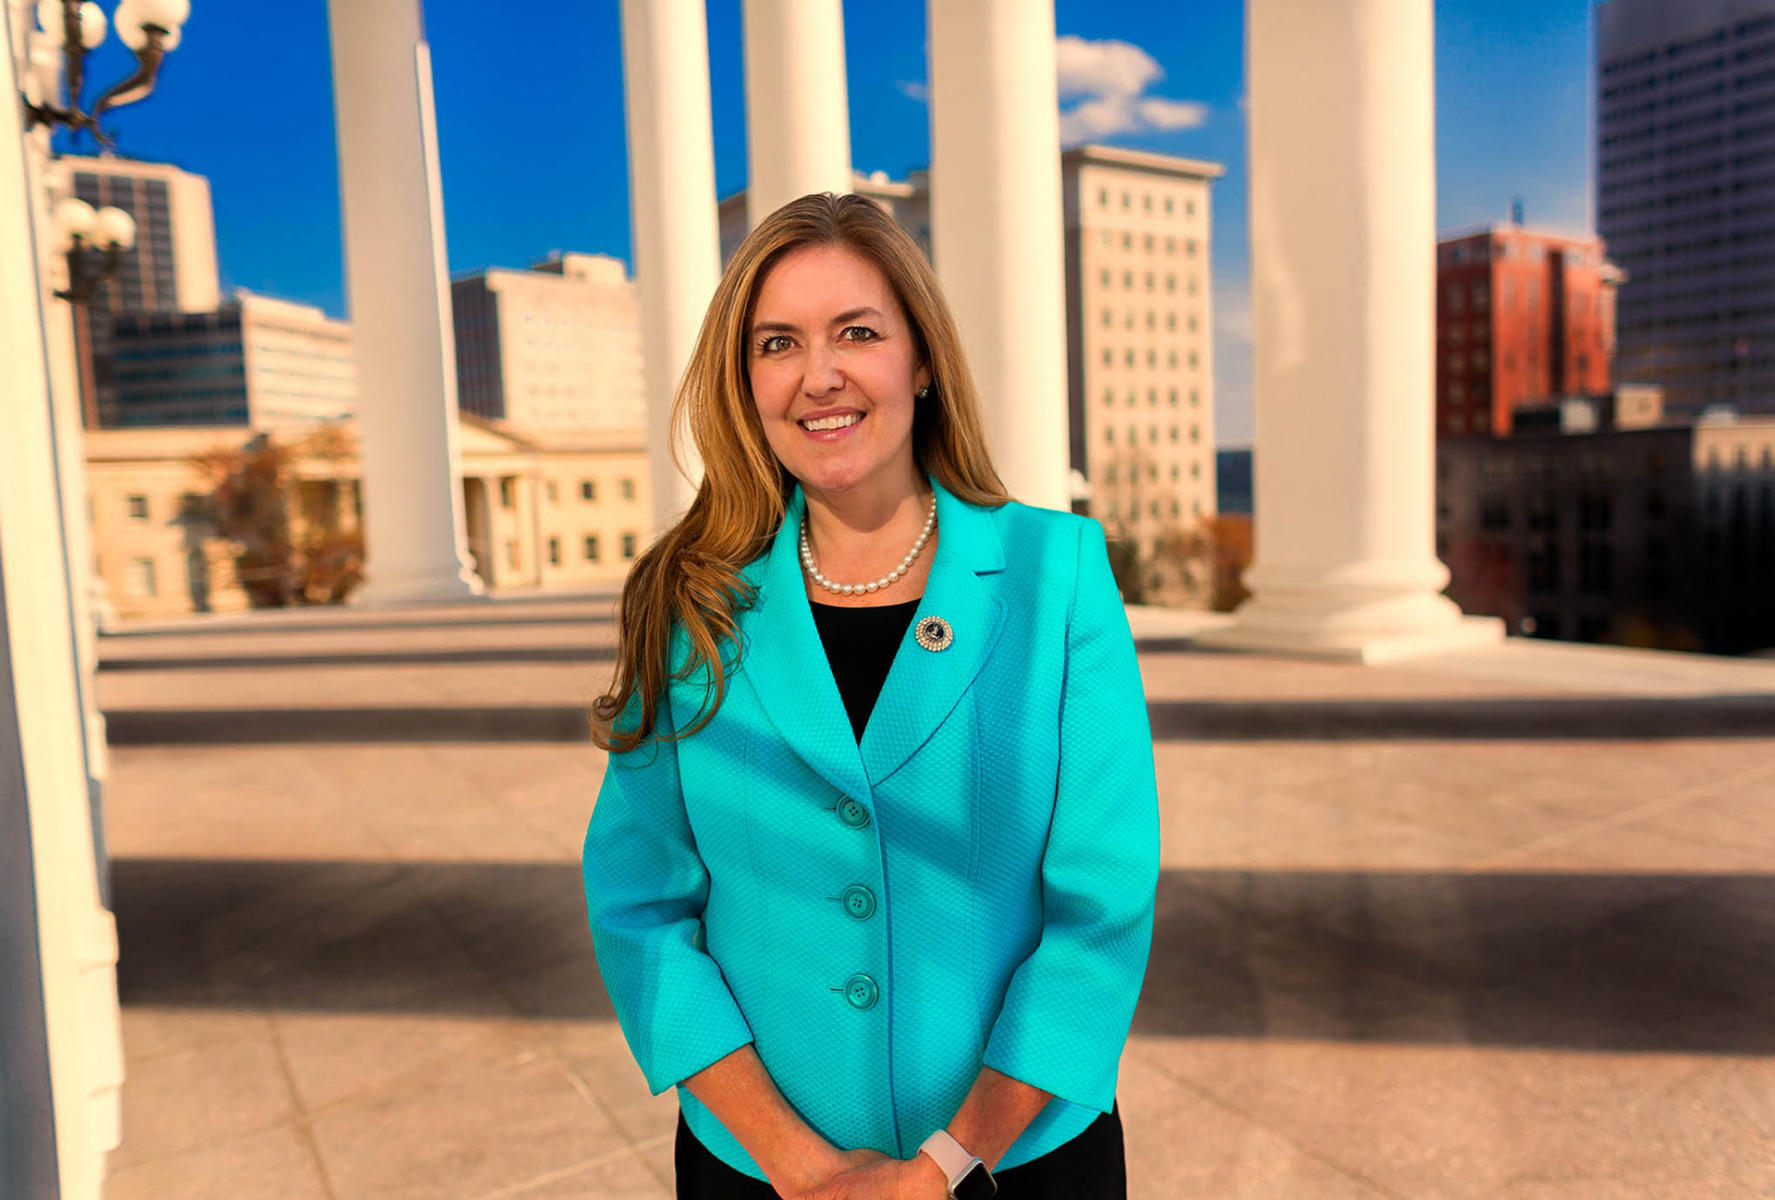 Representative Jennifer Wexton, Democrat of Virginia photographed outside the State House in Richmond.